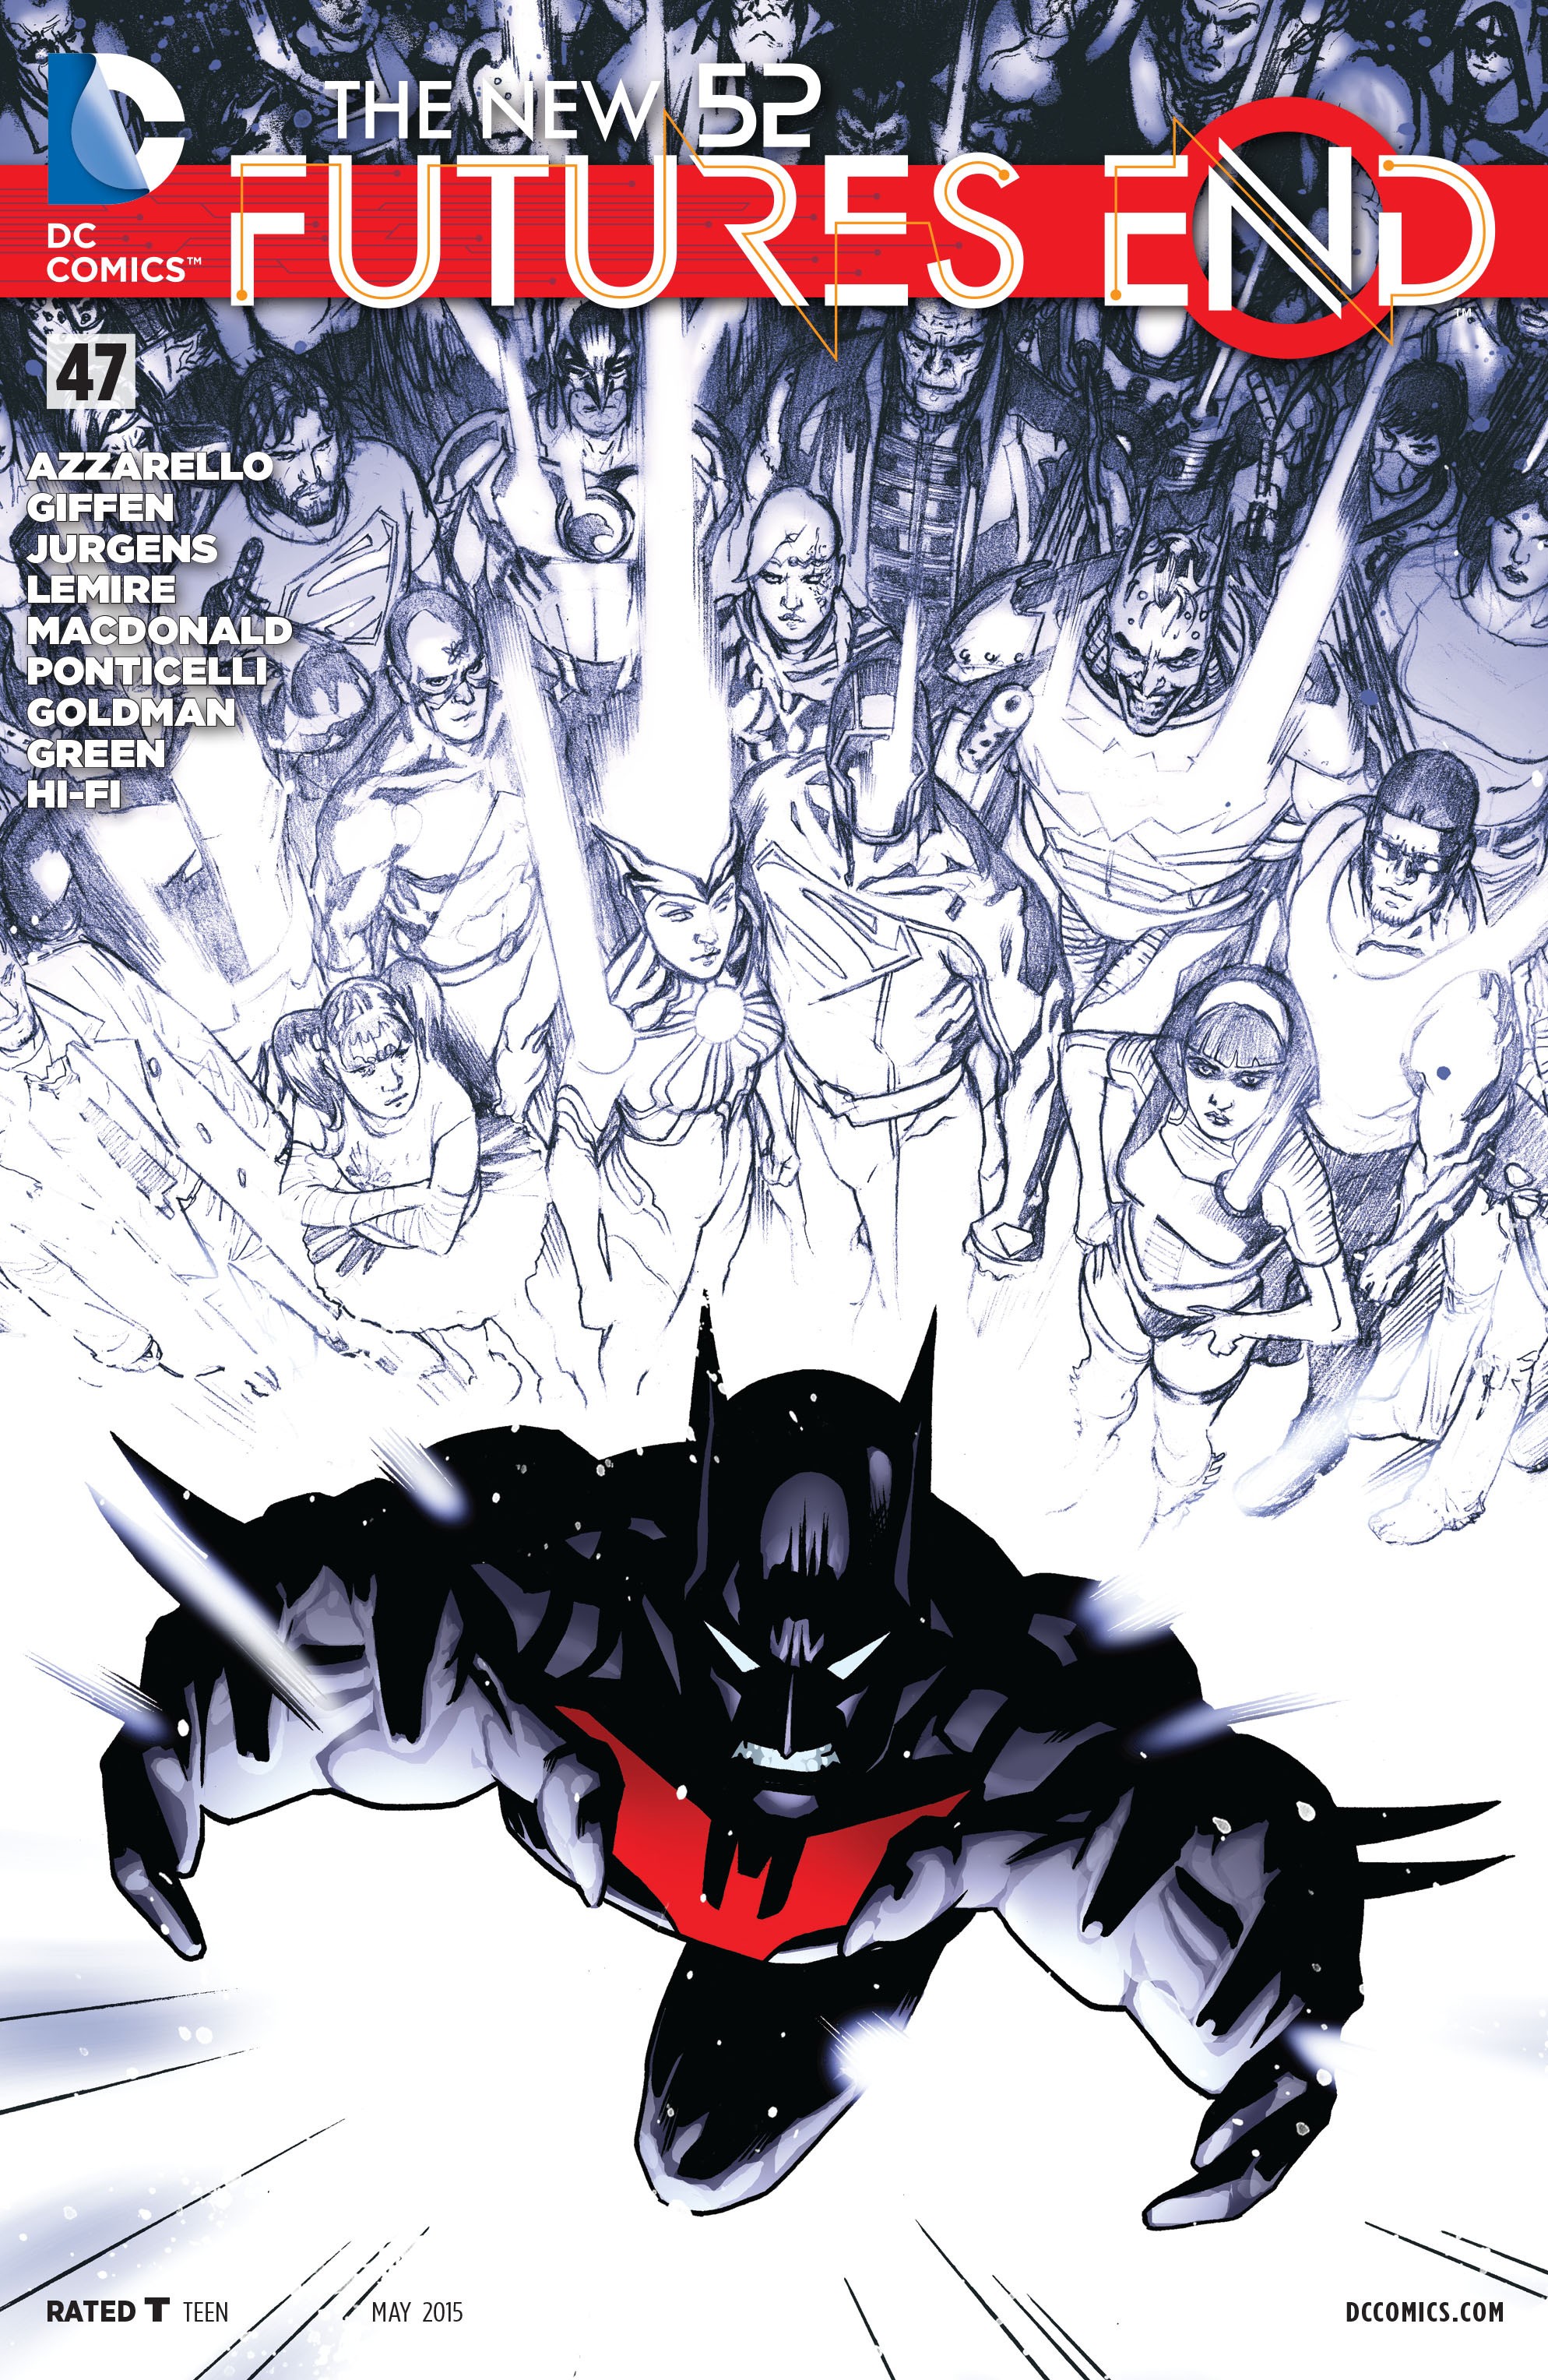 The New 52: Futures End Vol. 1 #47